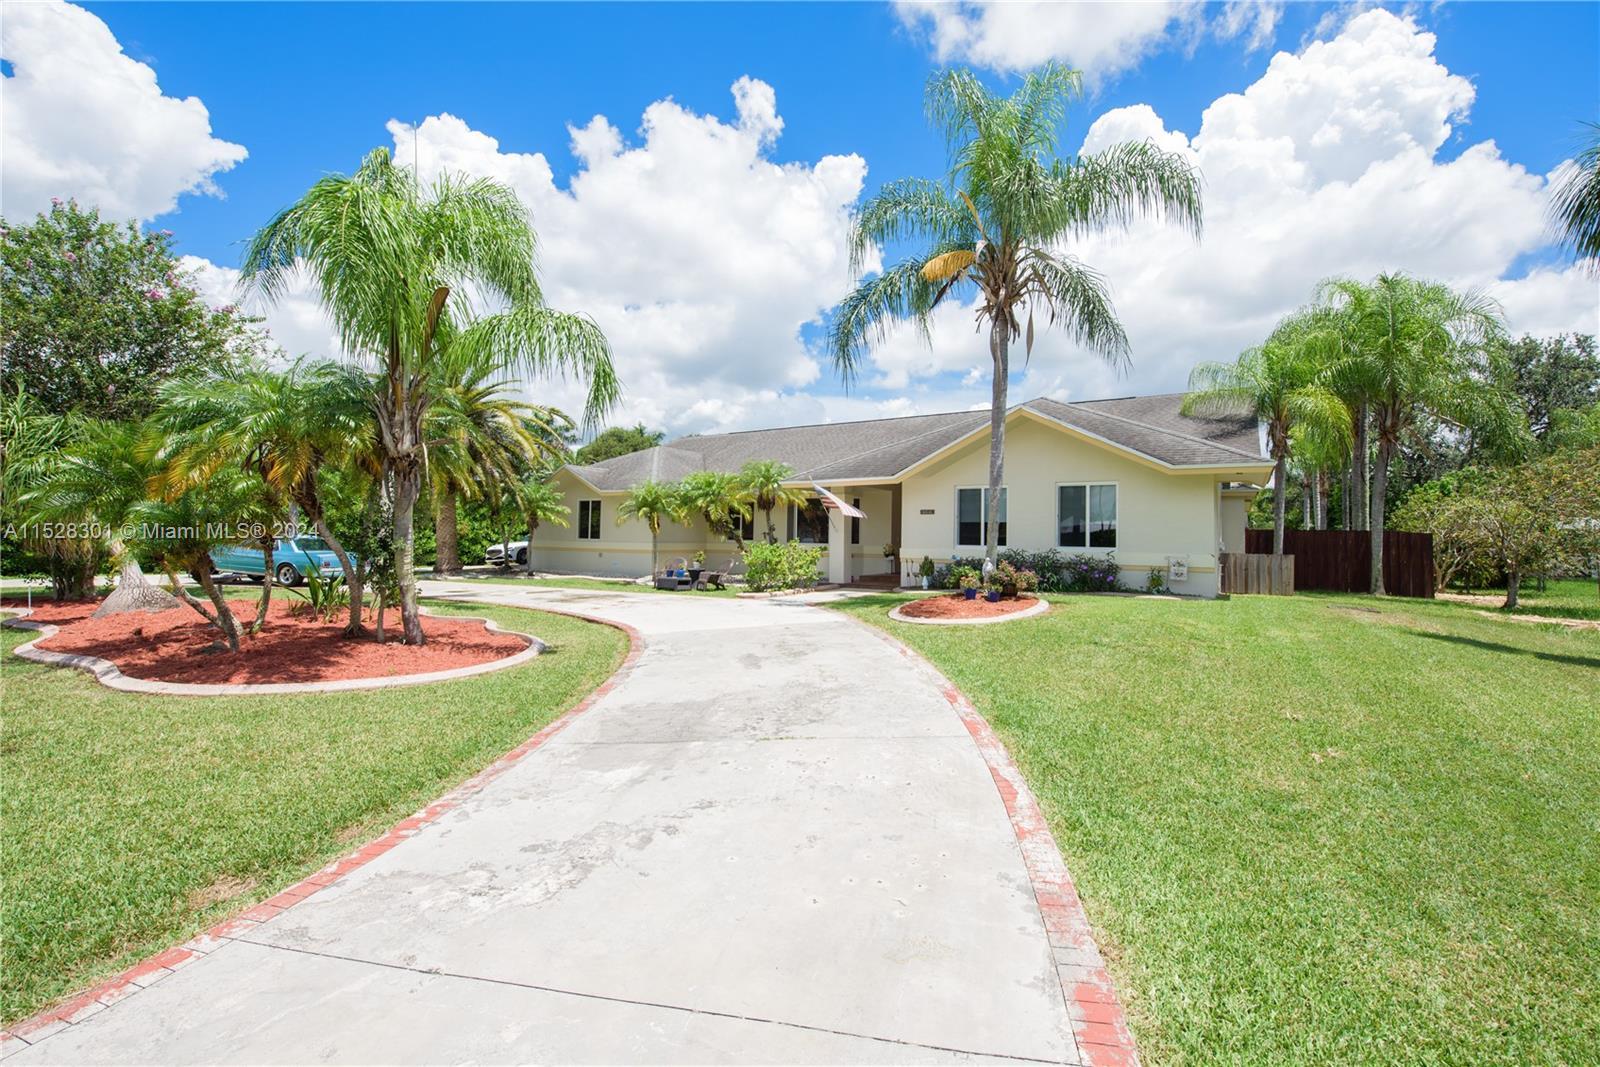 Photo of 16941 SW 277th St in Homestead, FL